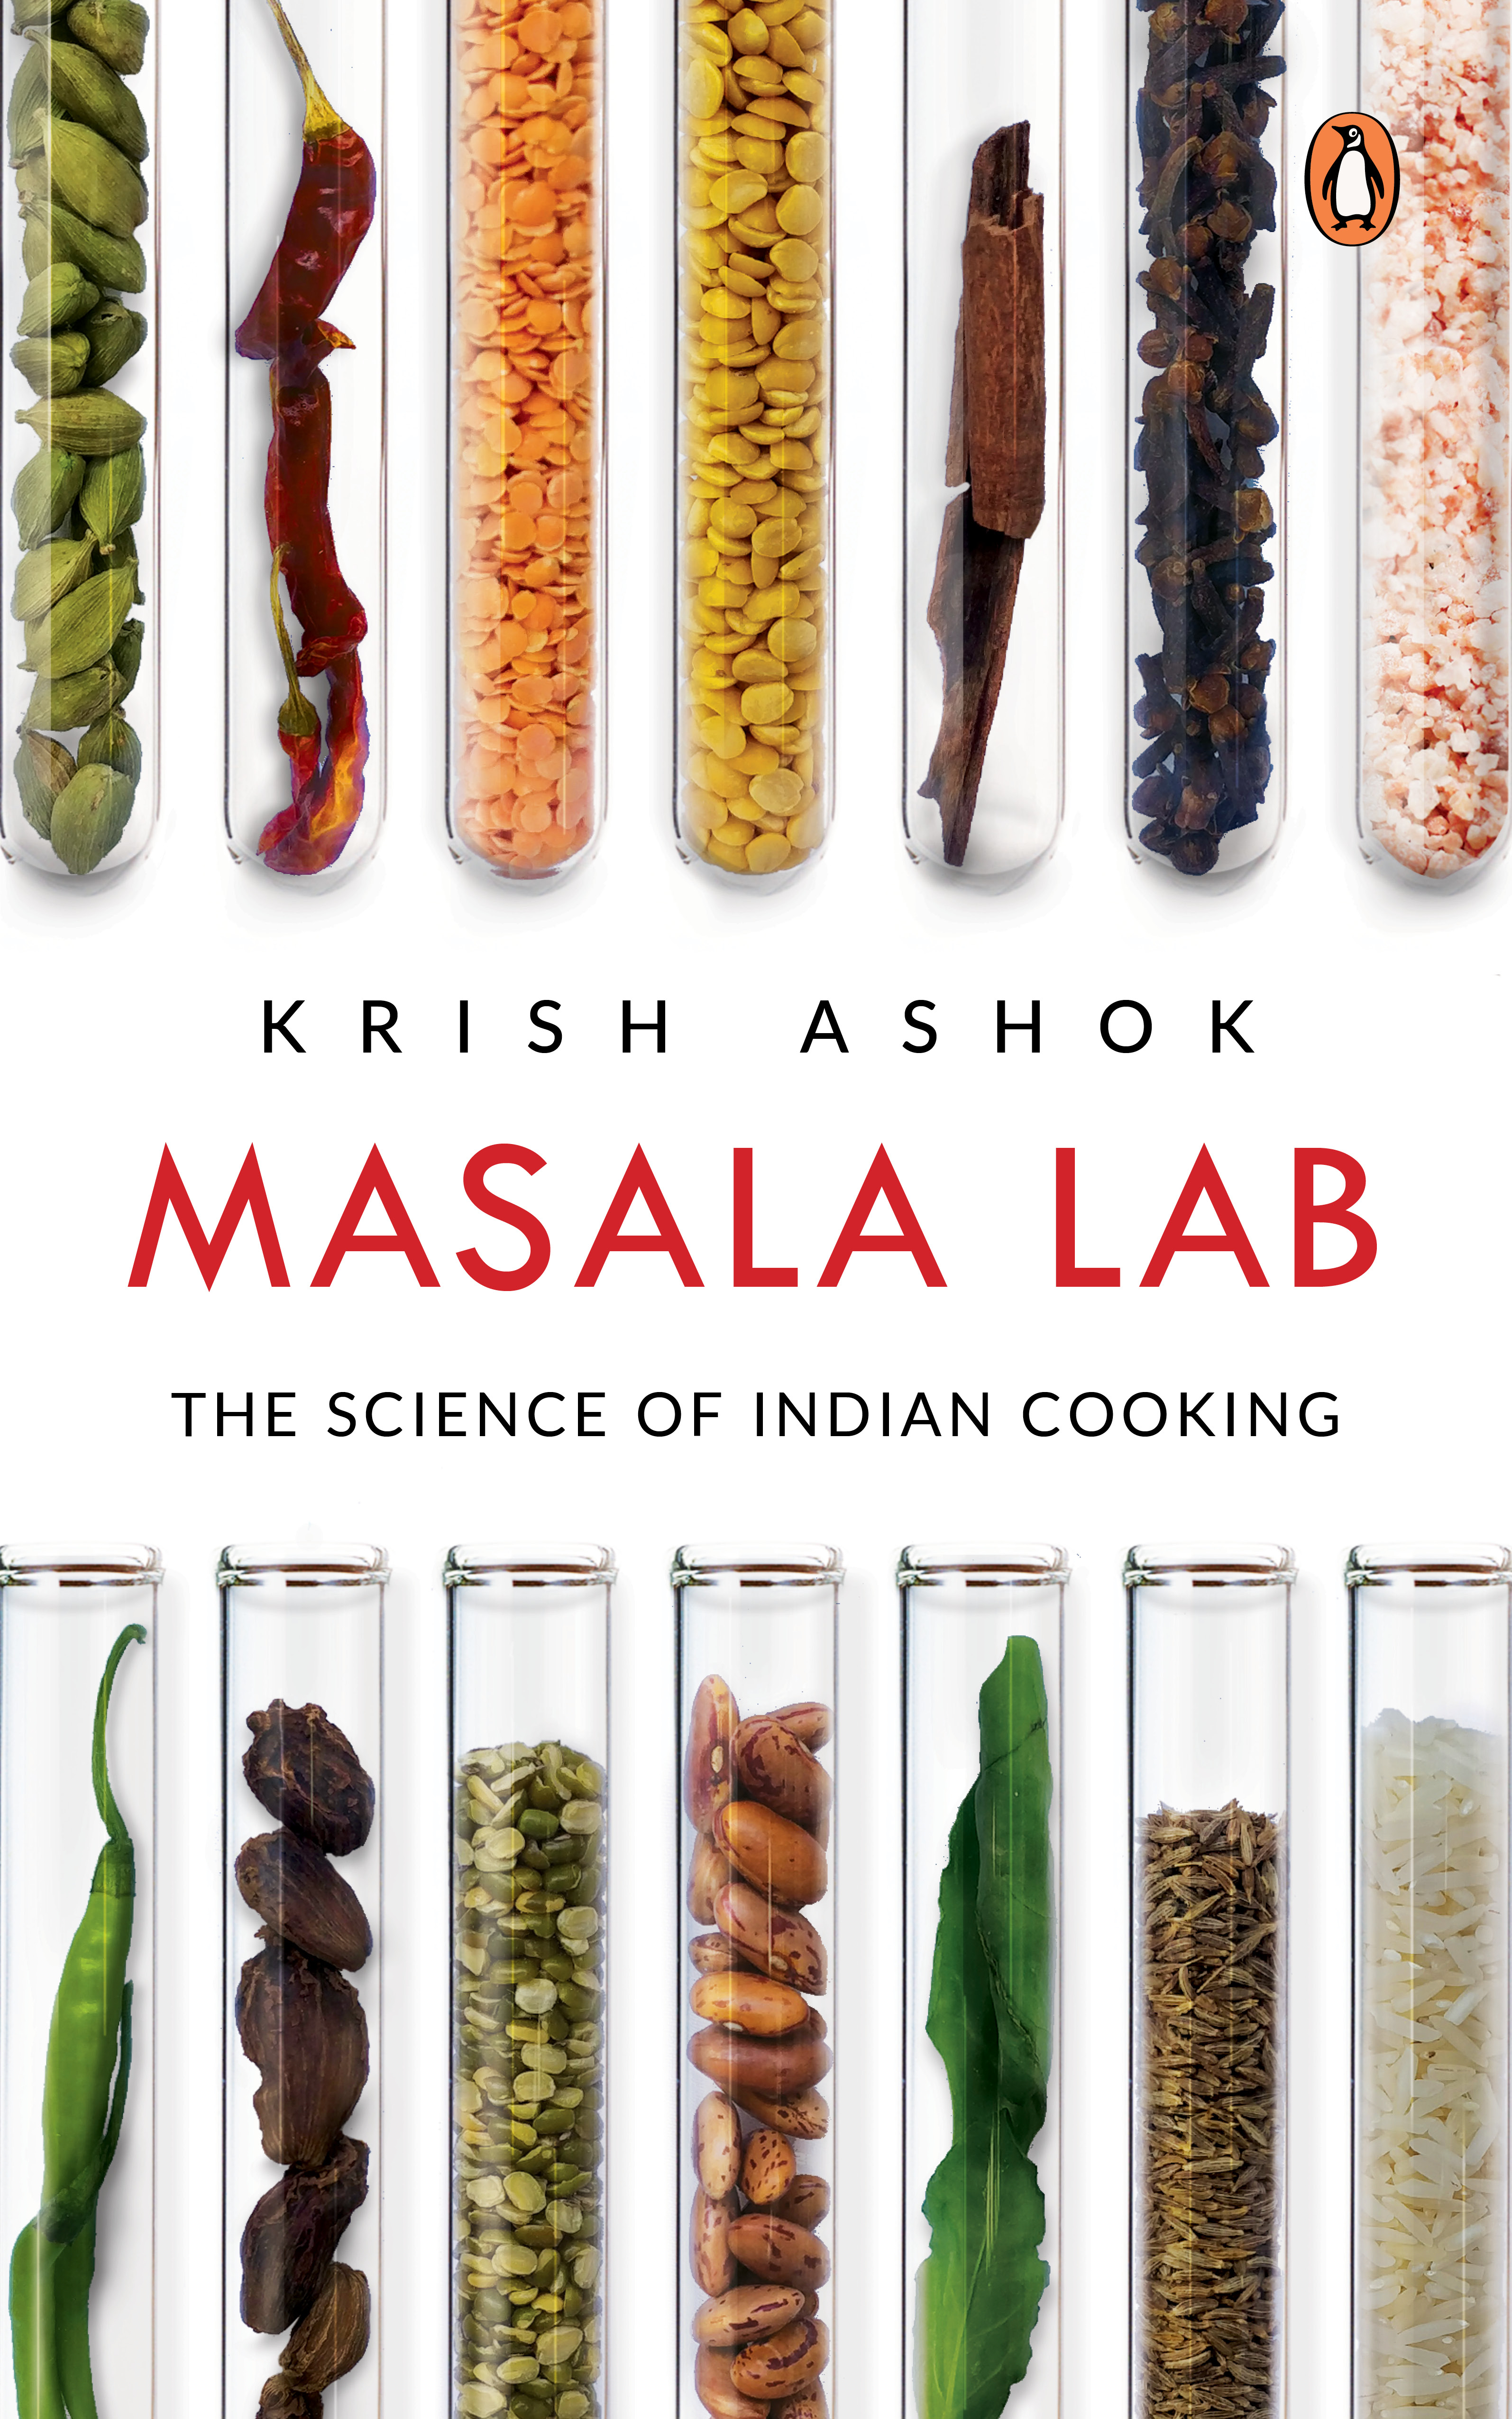 The Story Of Masala Lab